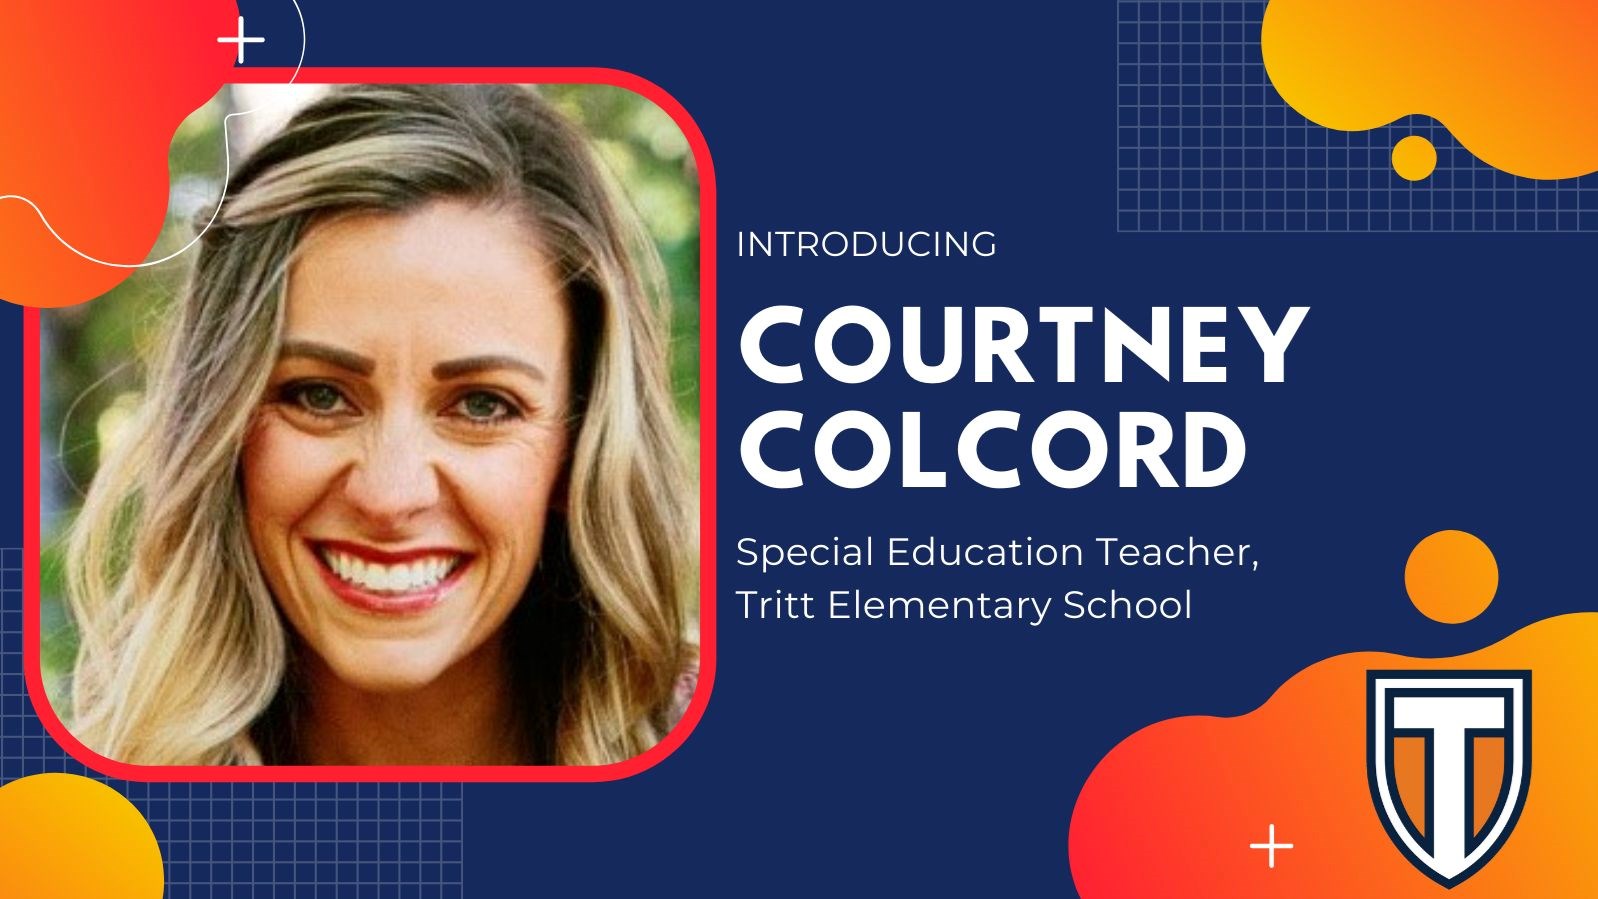 Welcome Courtney Colcord, Special Education Teacher